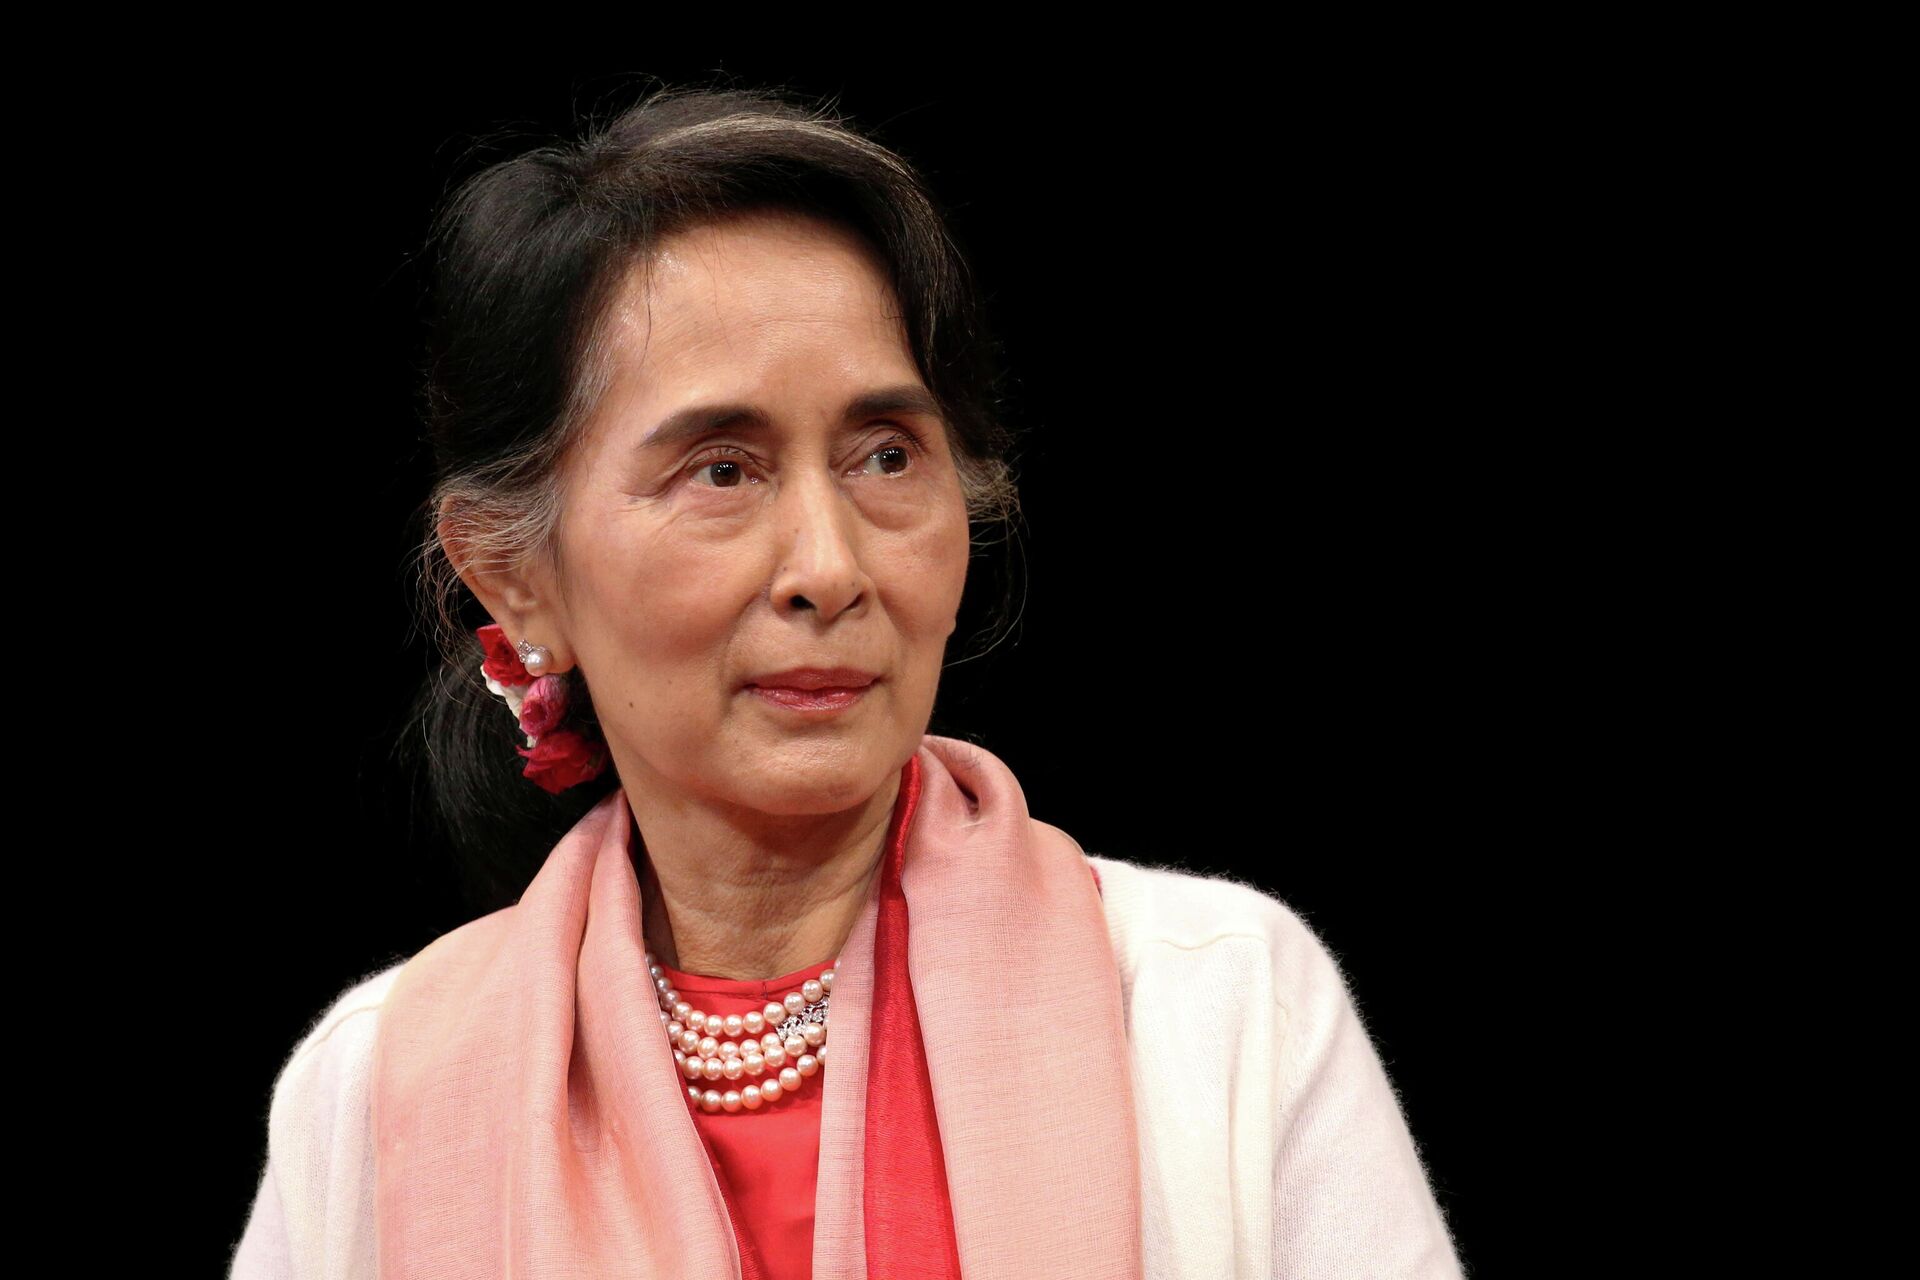 Myanmar's Minister of Foreign Affairs Aung San Suu Kyi speaks during an event at the Asia Society Policy Institute in New York City, U.S. September 21, 2016. - Sputnik International, 1920, 06.12.2021